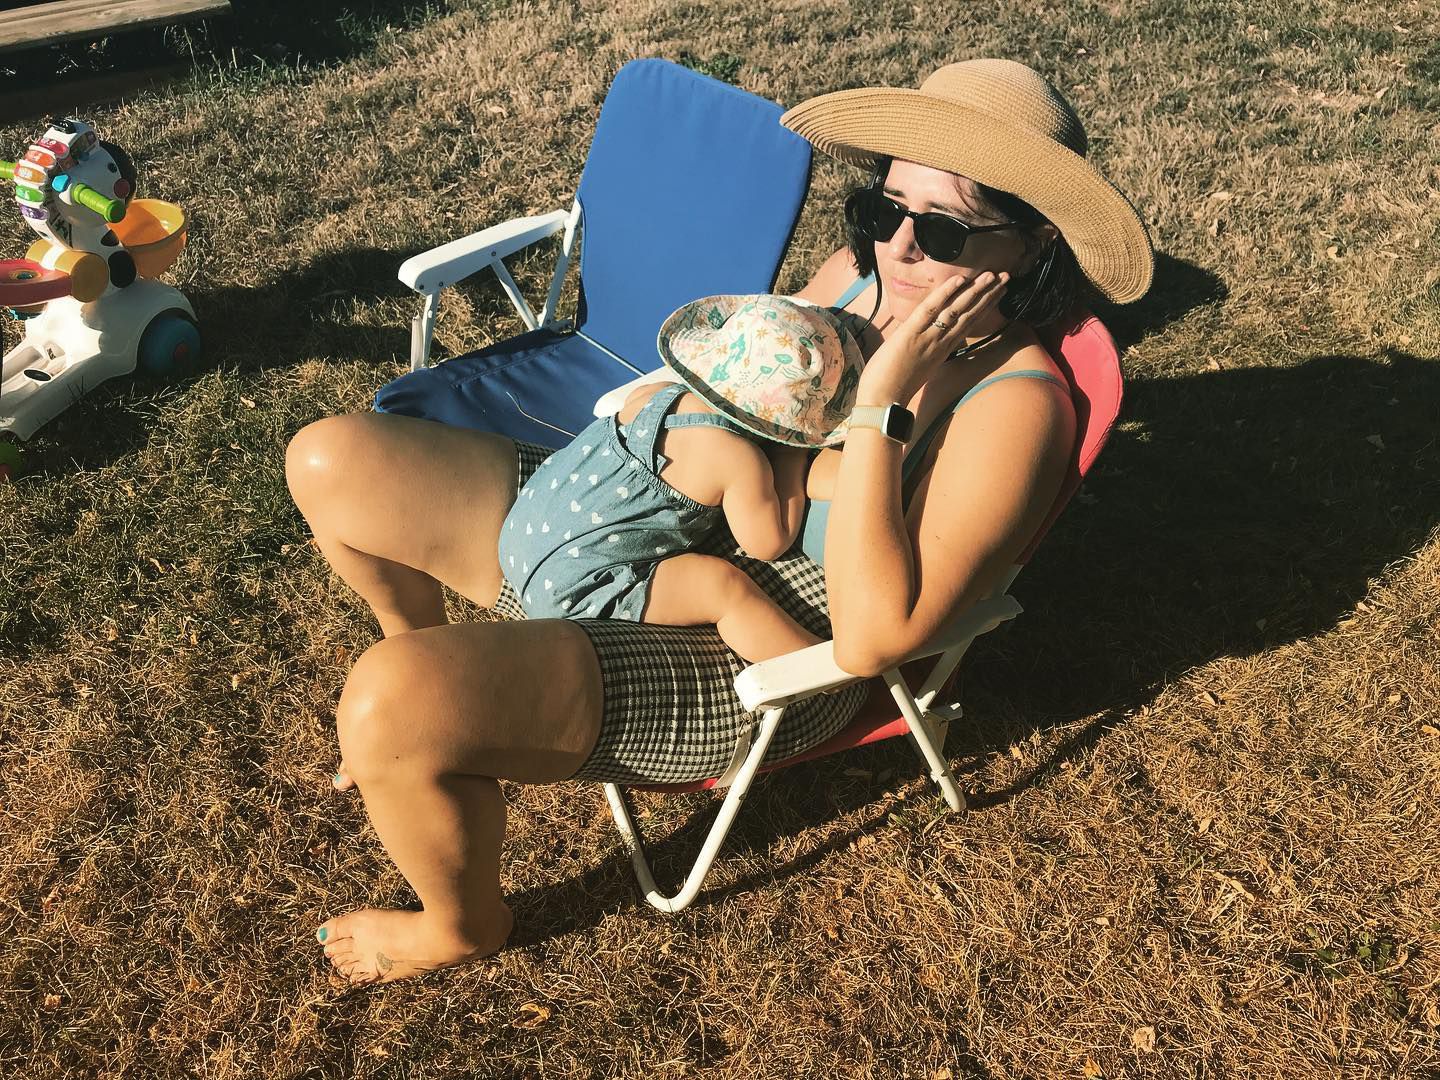 The wildest things no one tells you about breastfeeding before you start,  in honor of World Breastfeeding Week 